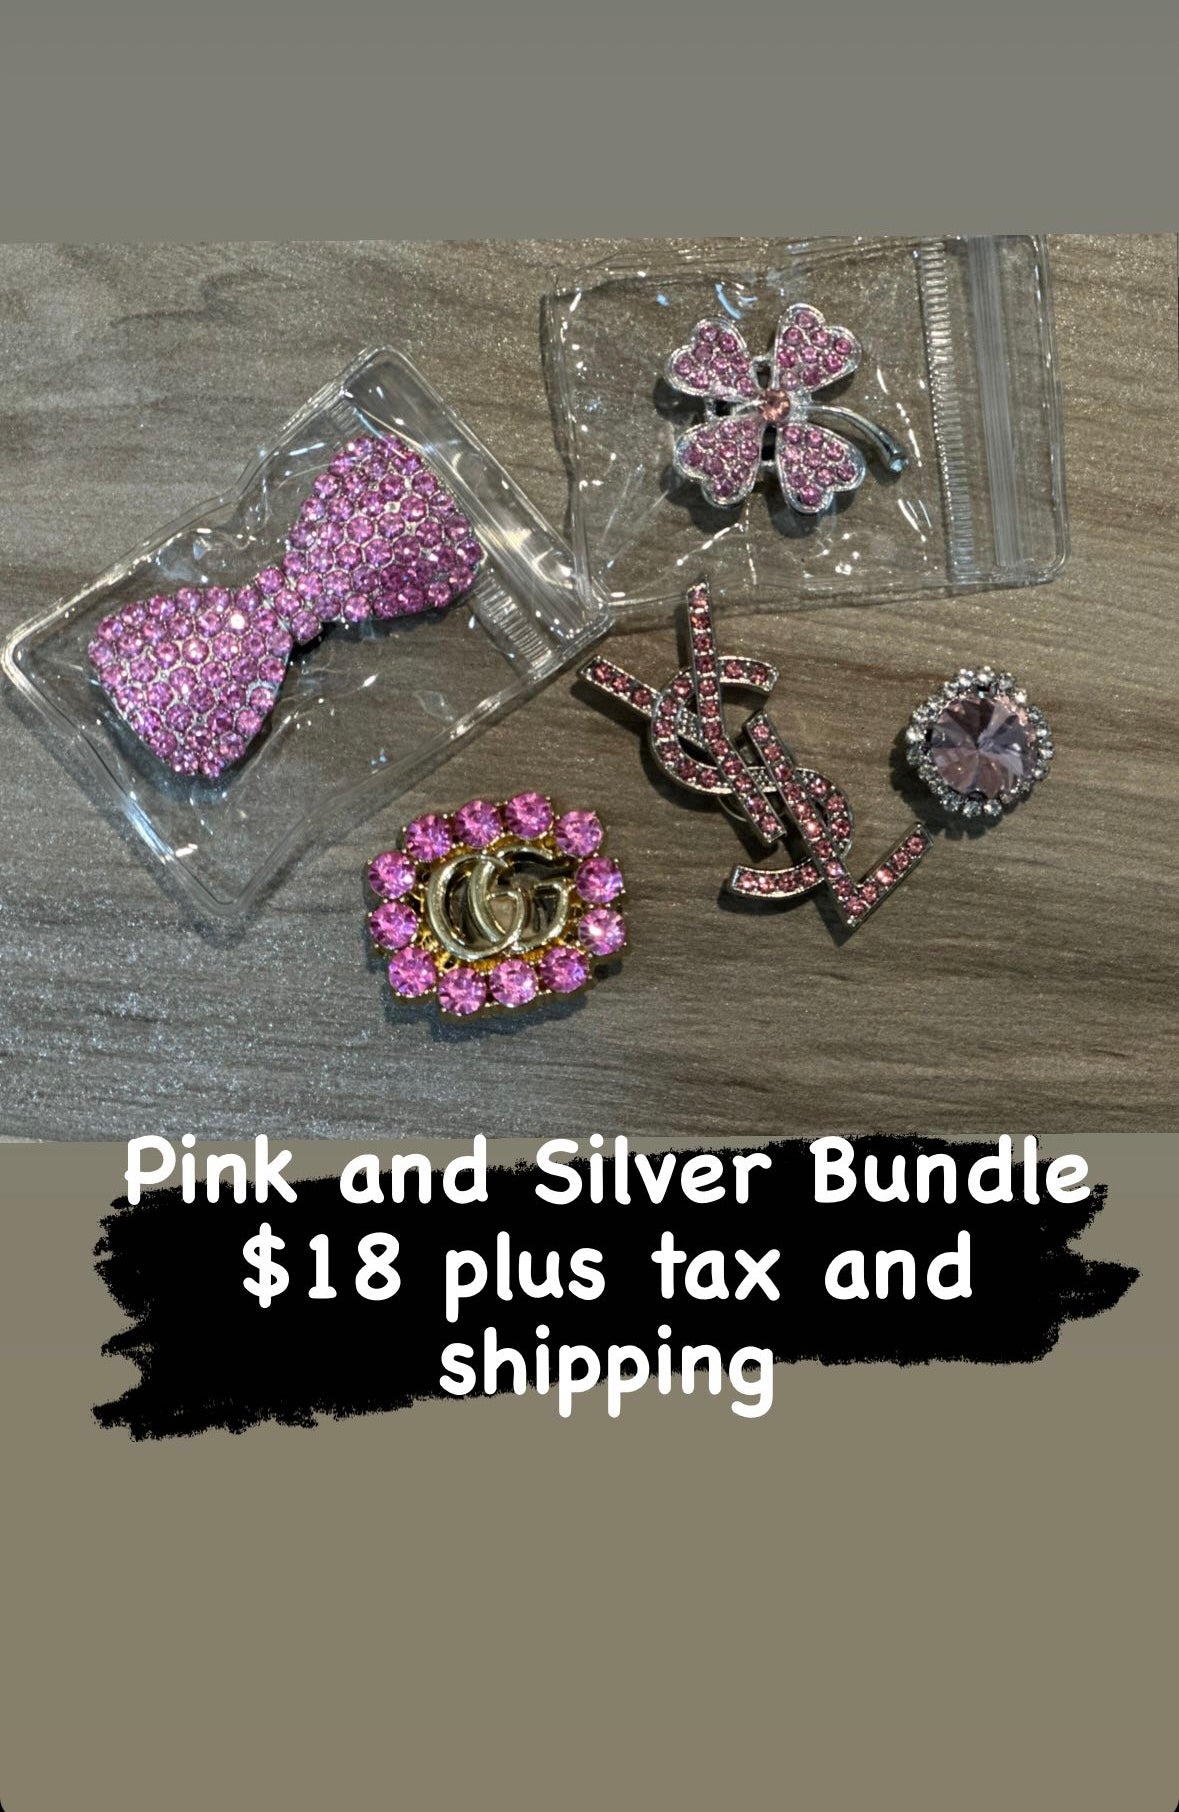 Pink and Silver Bundle